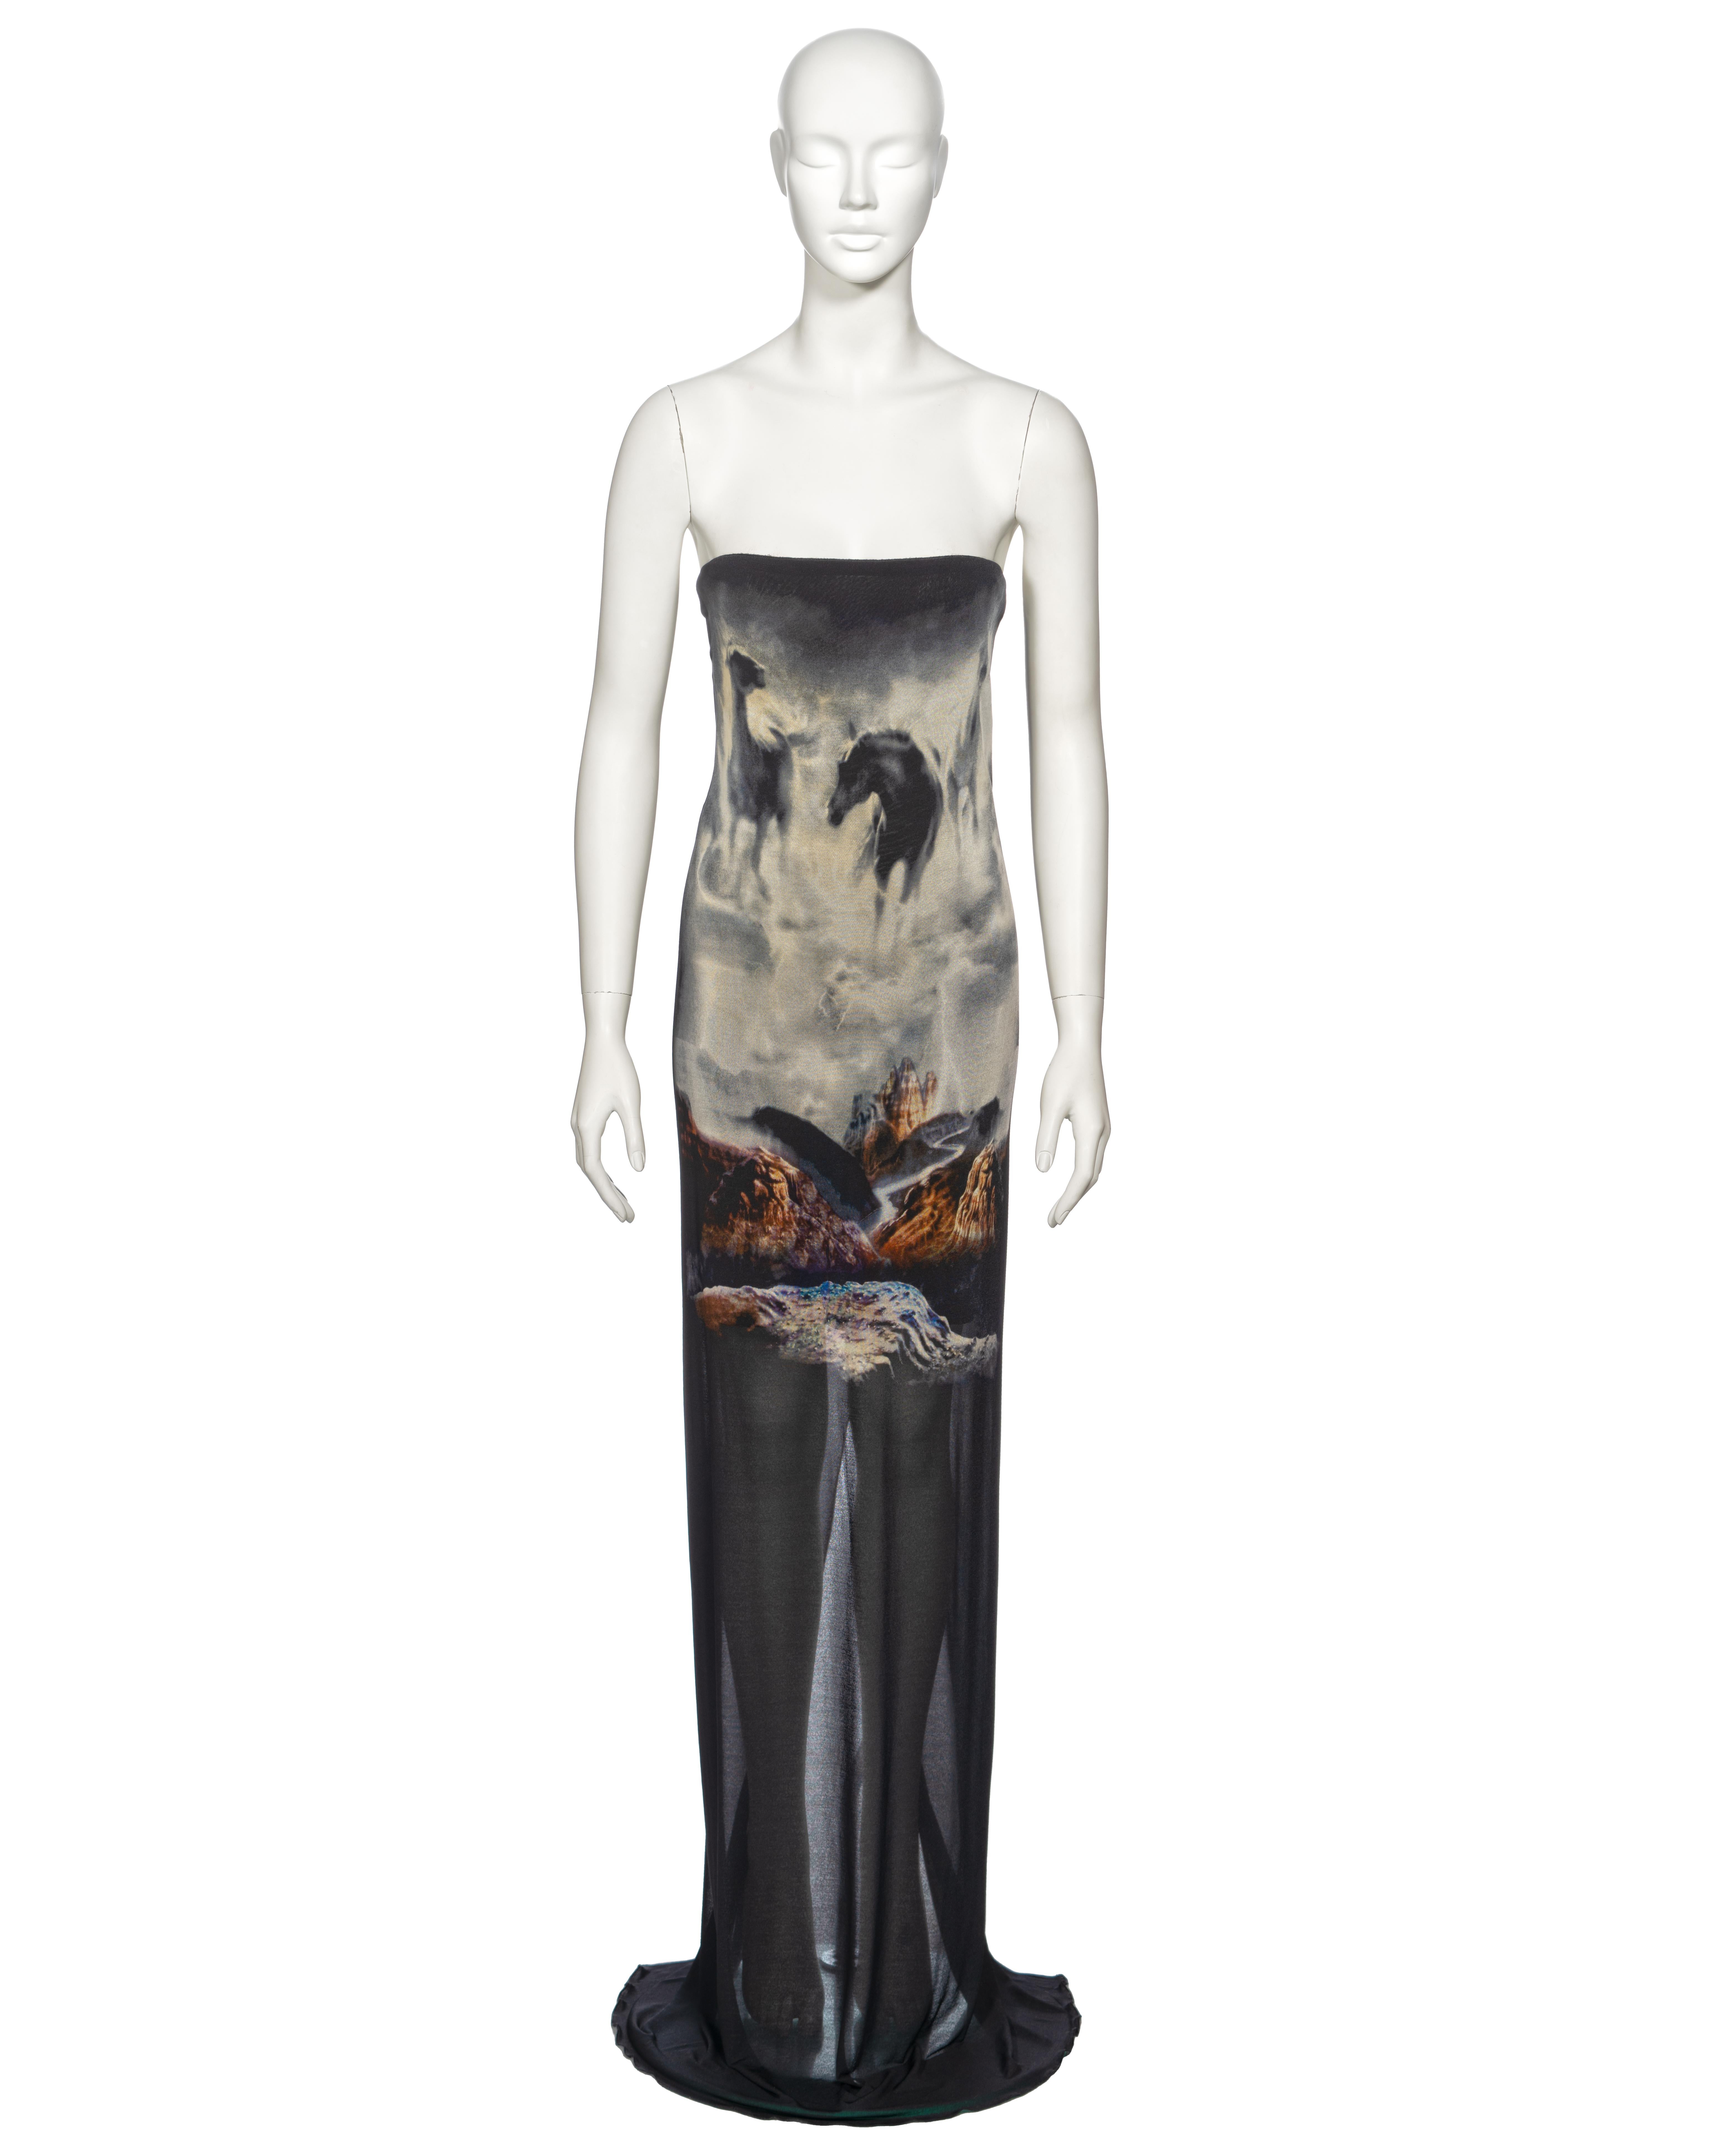 ▪ Archival Margiela Bandeau Maxi Dress
▪ Creative Director: Martin Margiela
▪ Spring-Summer 2008
▪ Sold by One of a Kind Archive
▪ Constructed from two layers of black viscose jersey 
▪ Western style print depicts running wild horses and a